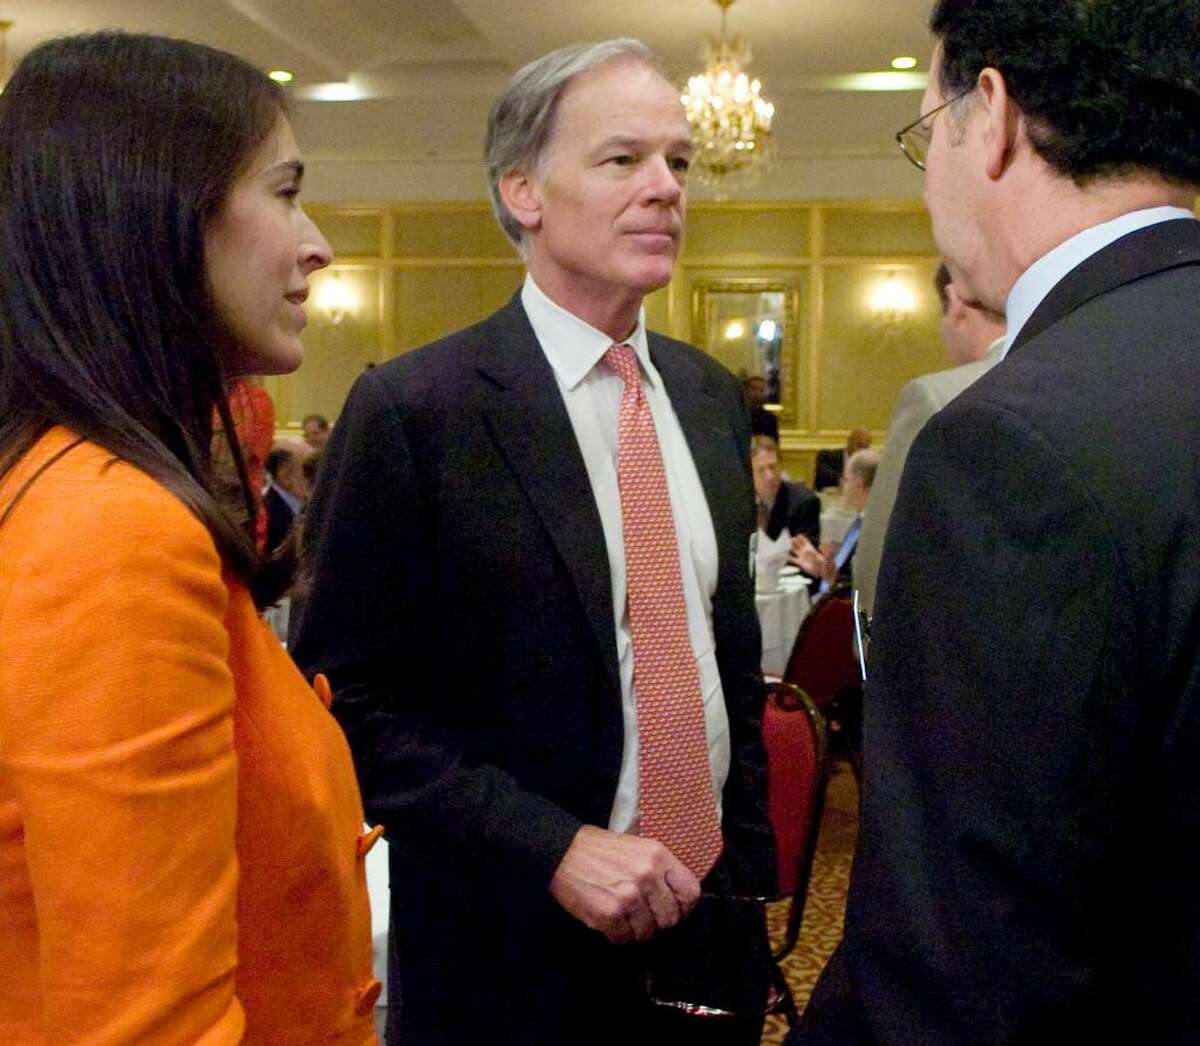 Republican candidate Tom Foley at the 2010 Gubernatorial Debate at the Stamford Plaza Hotel & Conference Center in Stamford, Conn. on Tuesday June 29, 2010.